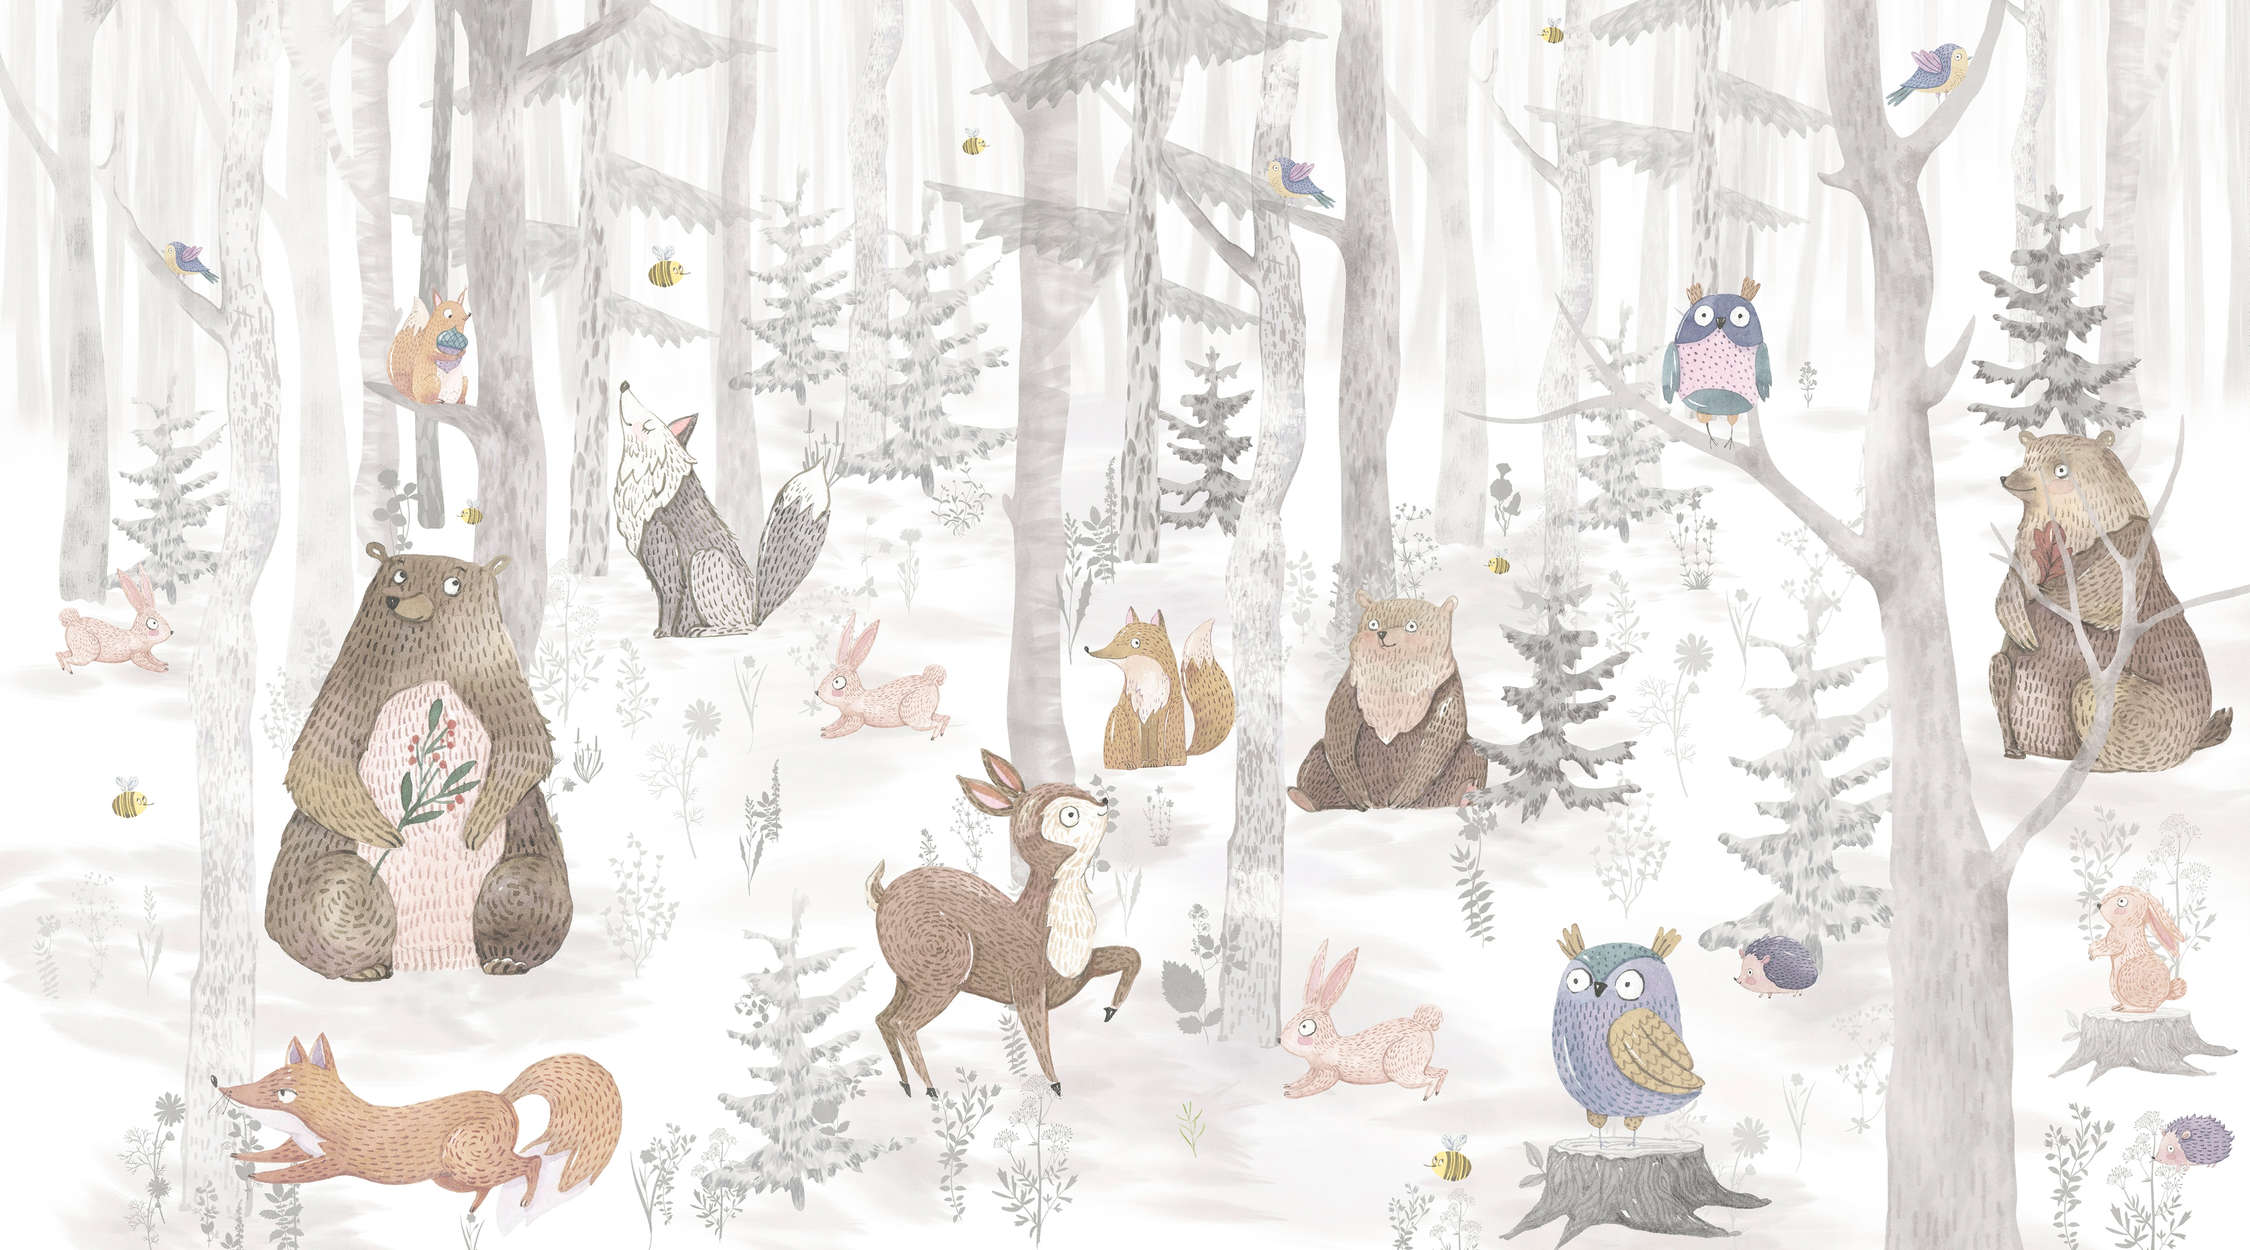             Magic Forest with Animals Wallpaper - Smooth & matt non-woven
        